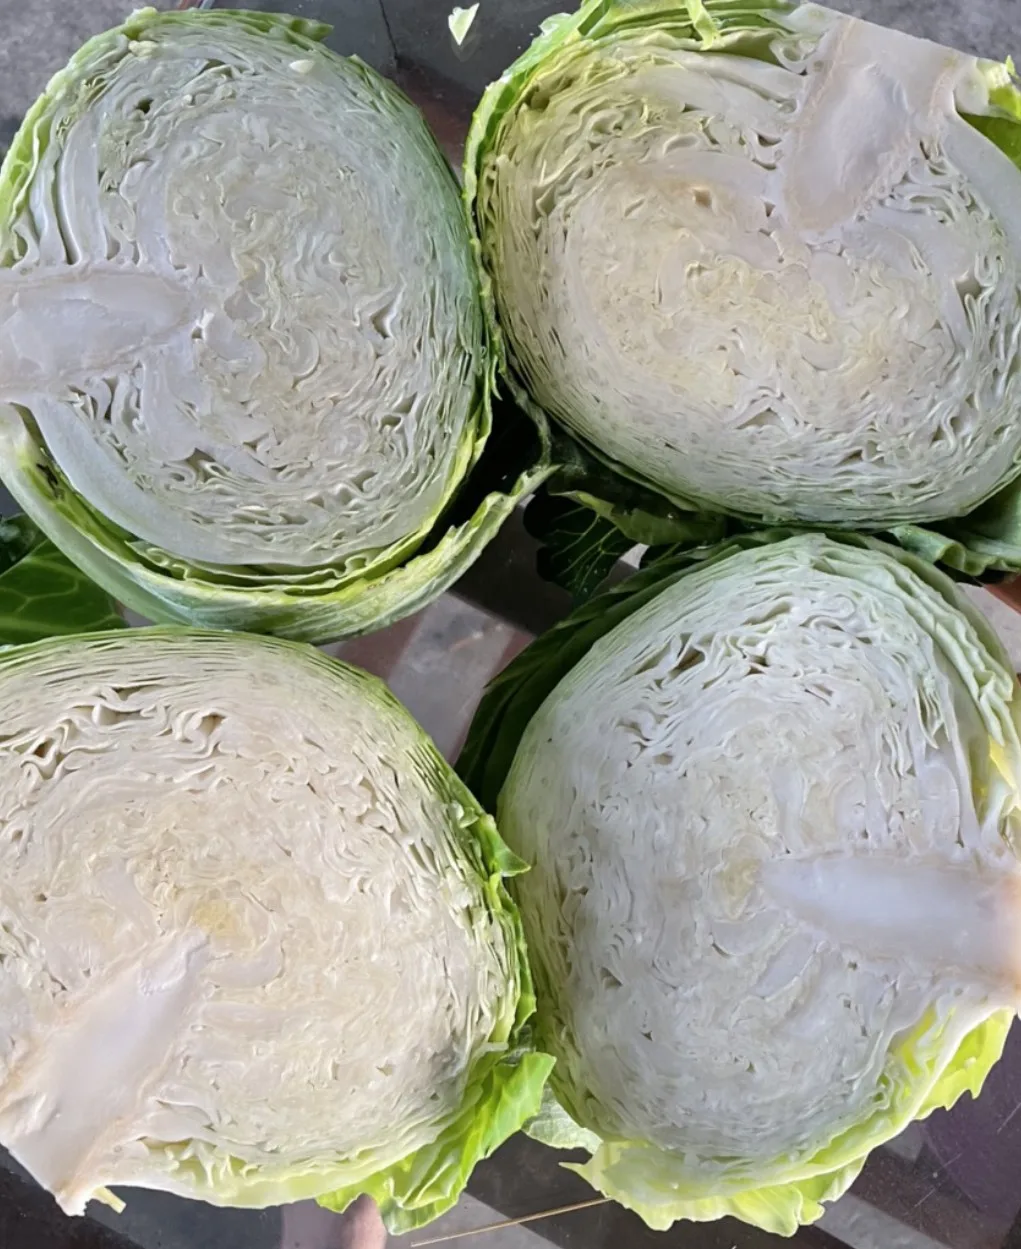 Premium Quality Fresh Cabbage 1-2.5kg/pcs Sakata With Customized logo and packaging made in Vietnam 2023